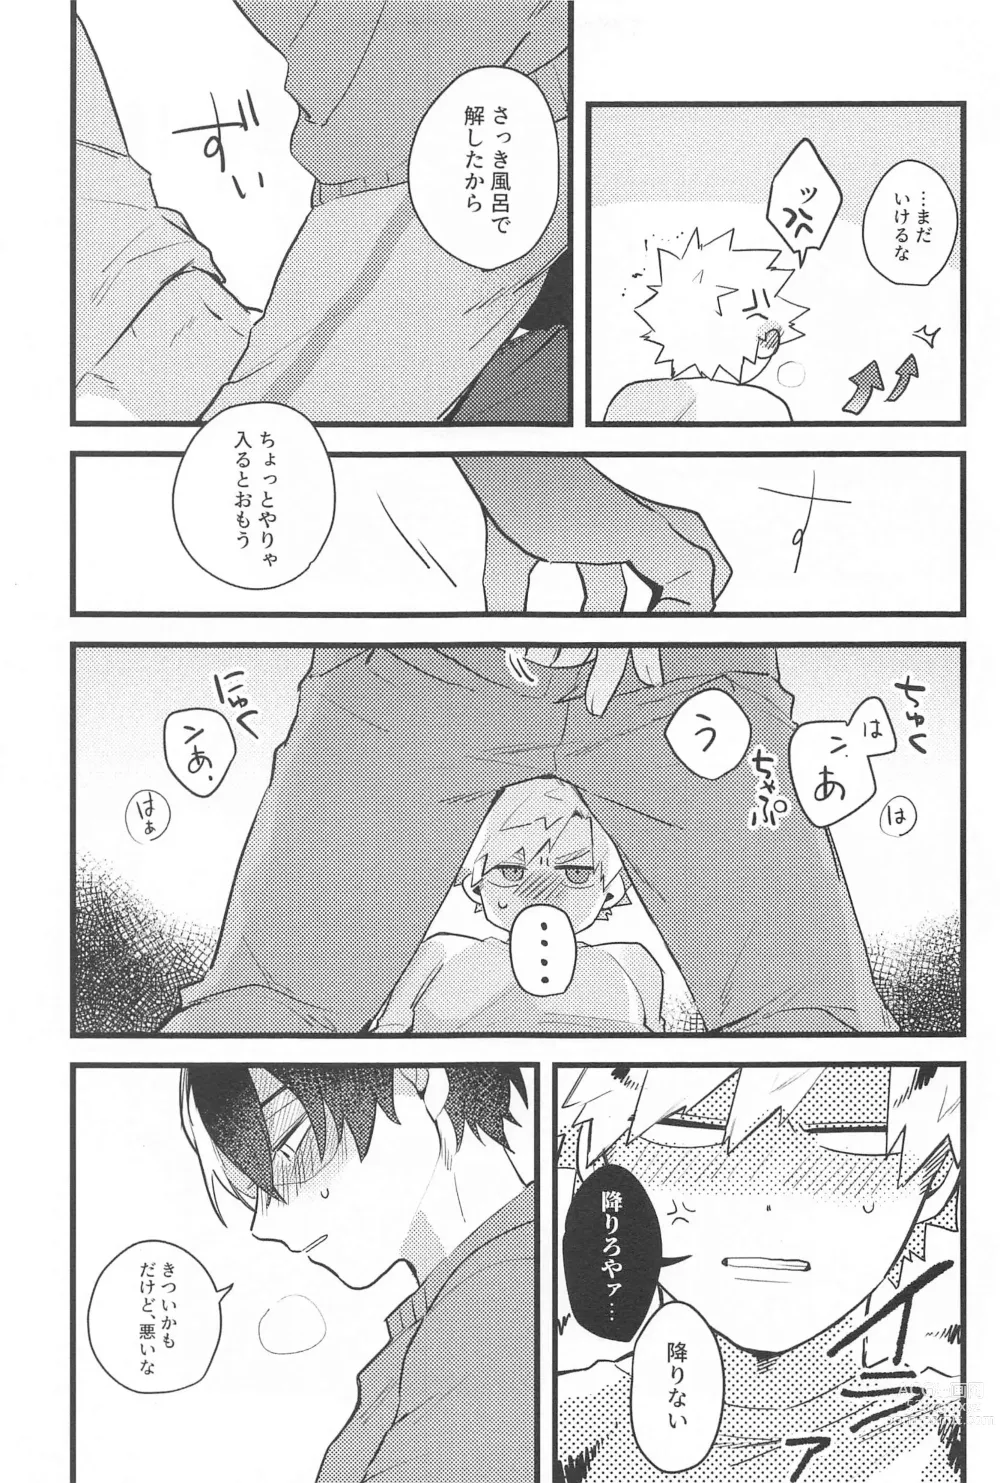 Page 12 of doujinshi Mellow Ruby Poison